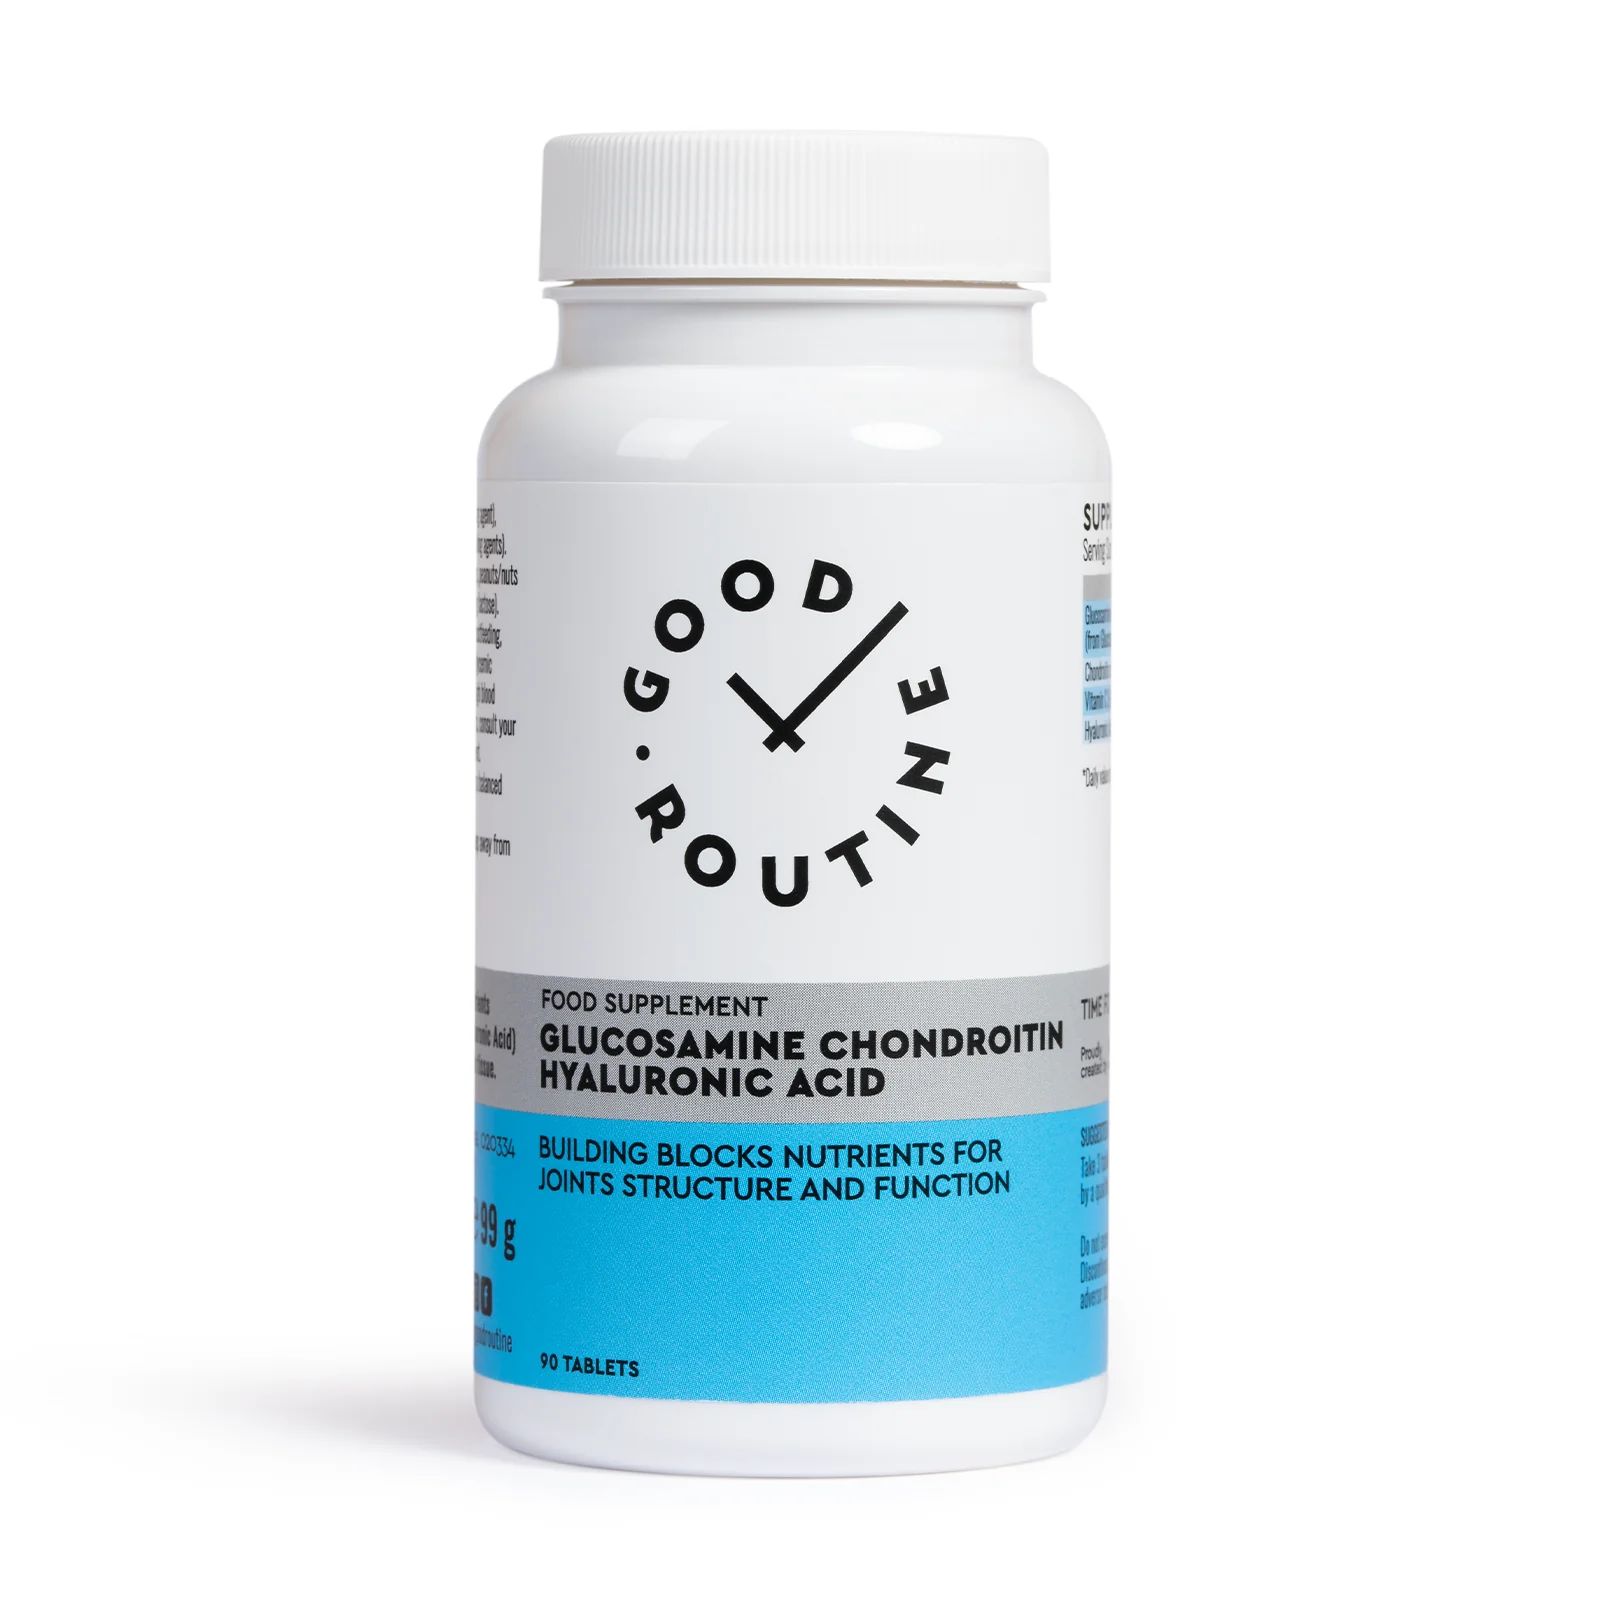 Glucosamine Chondroitin Hyaluronic Acid, 90 comprimate, Good Routine